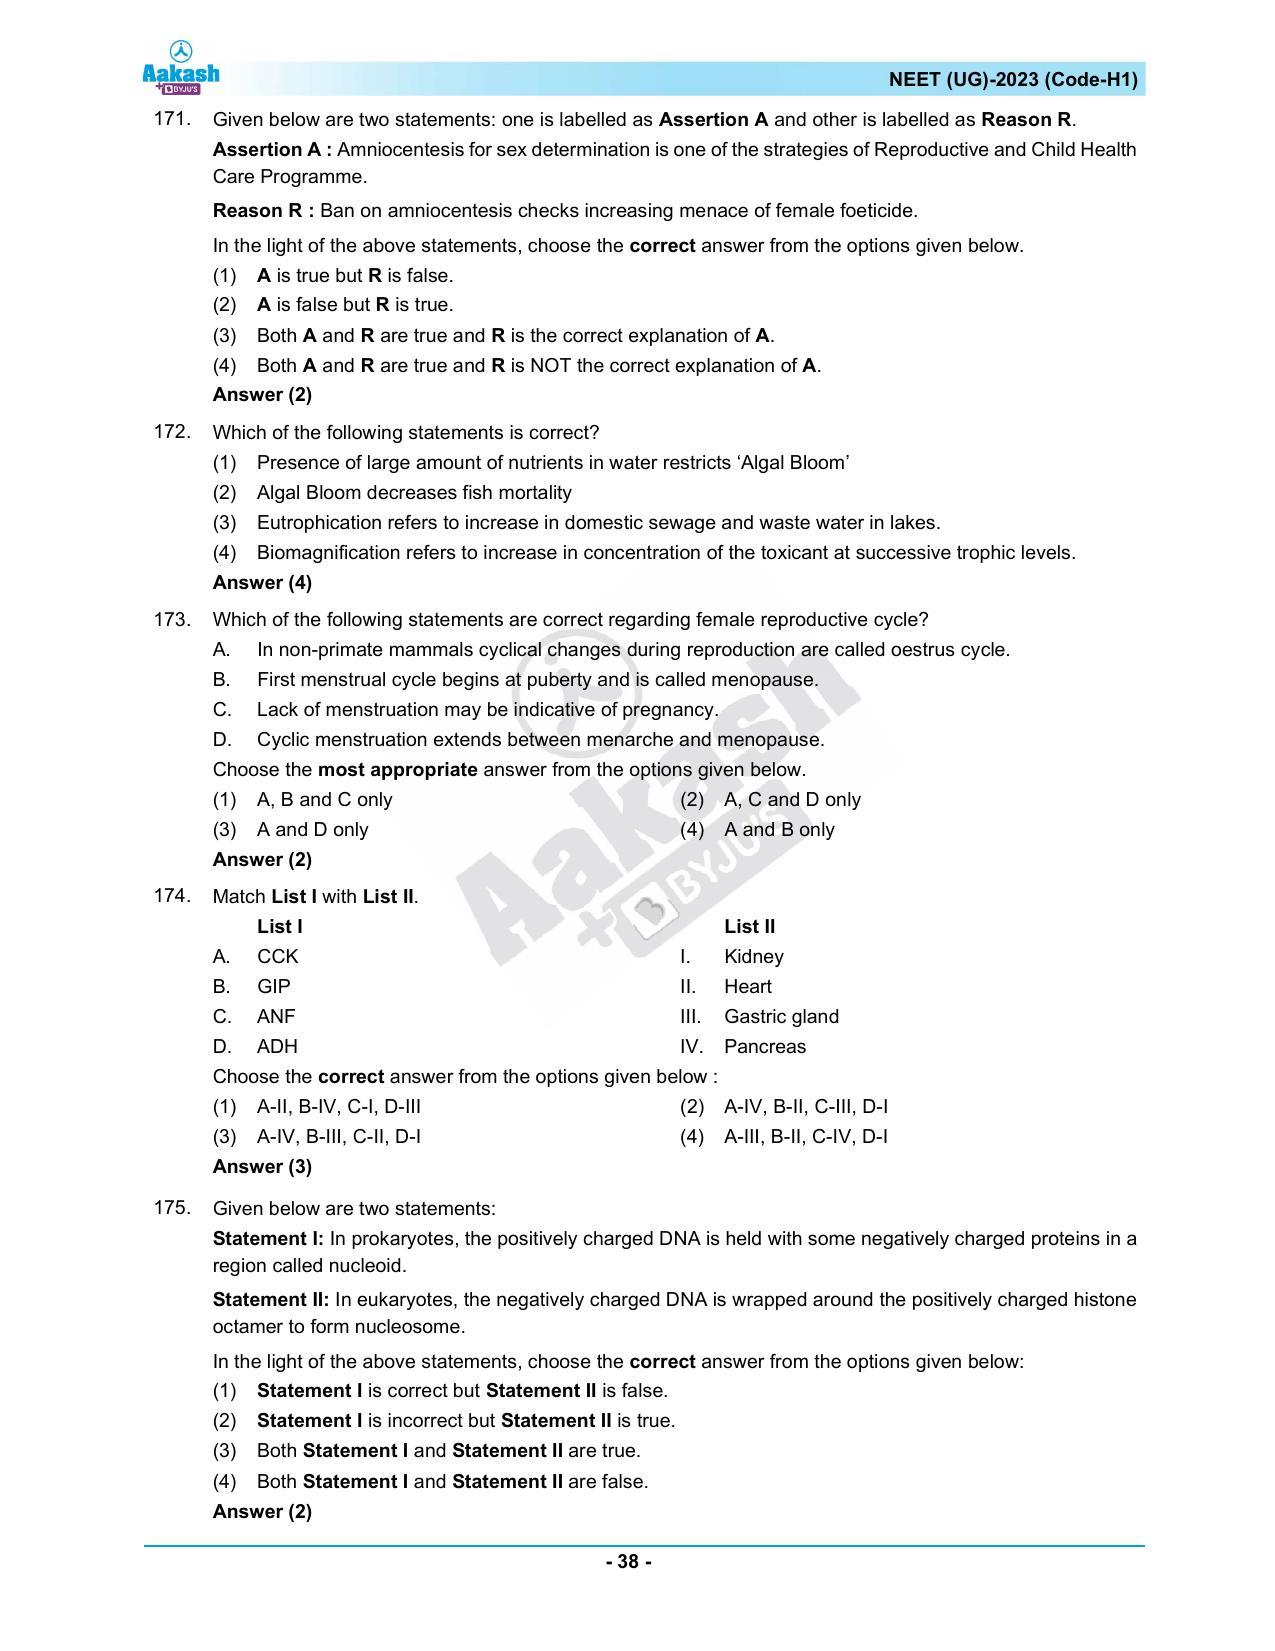 NEET 2023 Question Paper H1 - Page 38